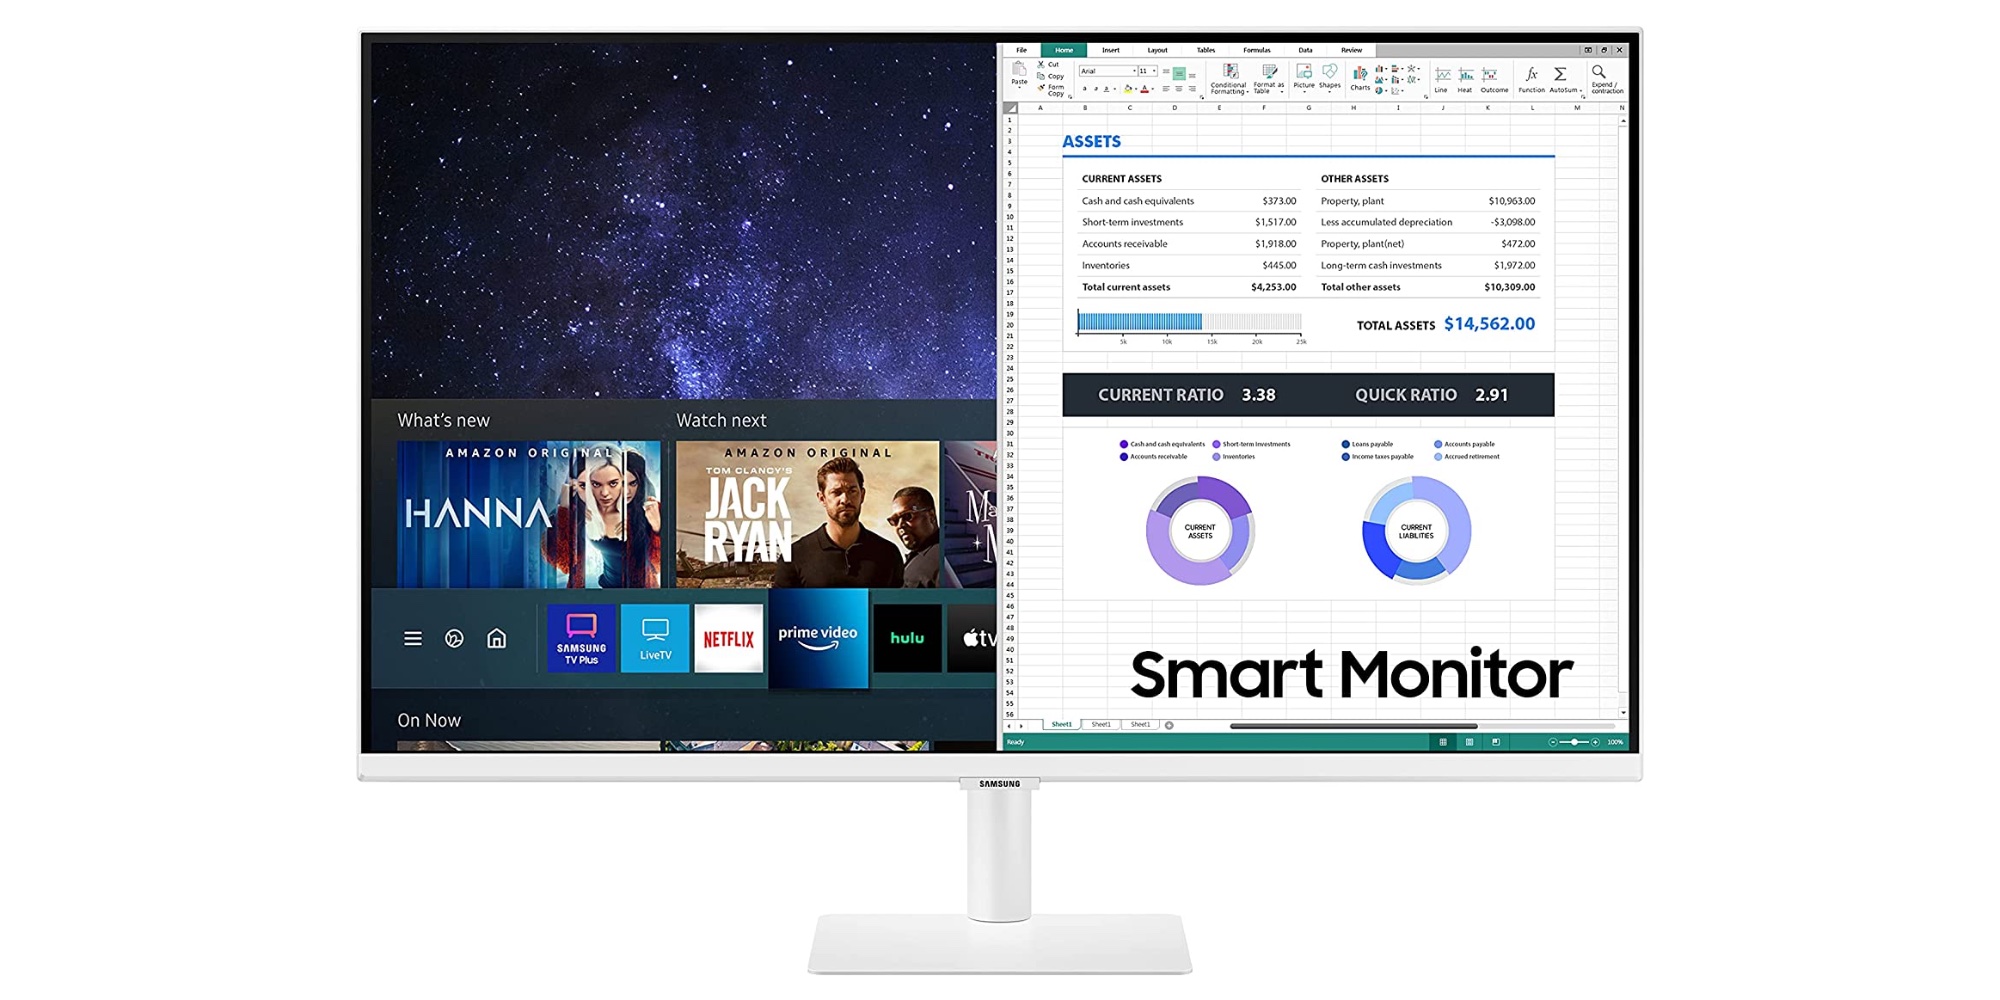 kust Ik was mijn kleren Anekdote Samsung's new white 27-inch M5 AirPlay 2 Monitor drops in price for second  time to $220 - 9to5Toys